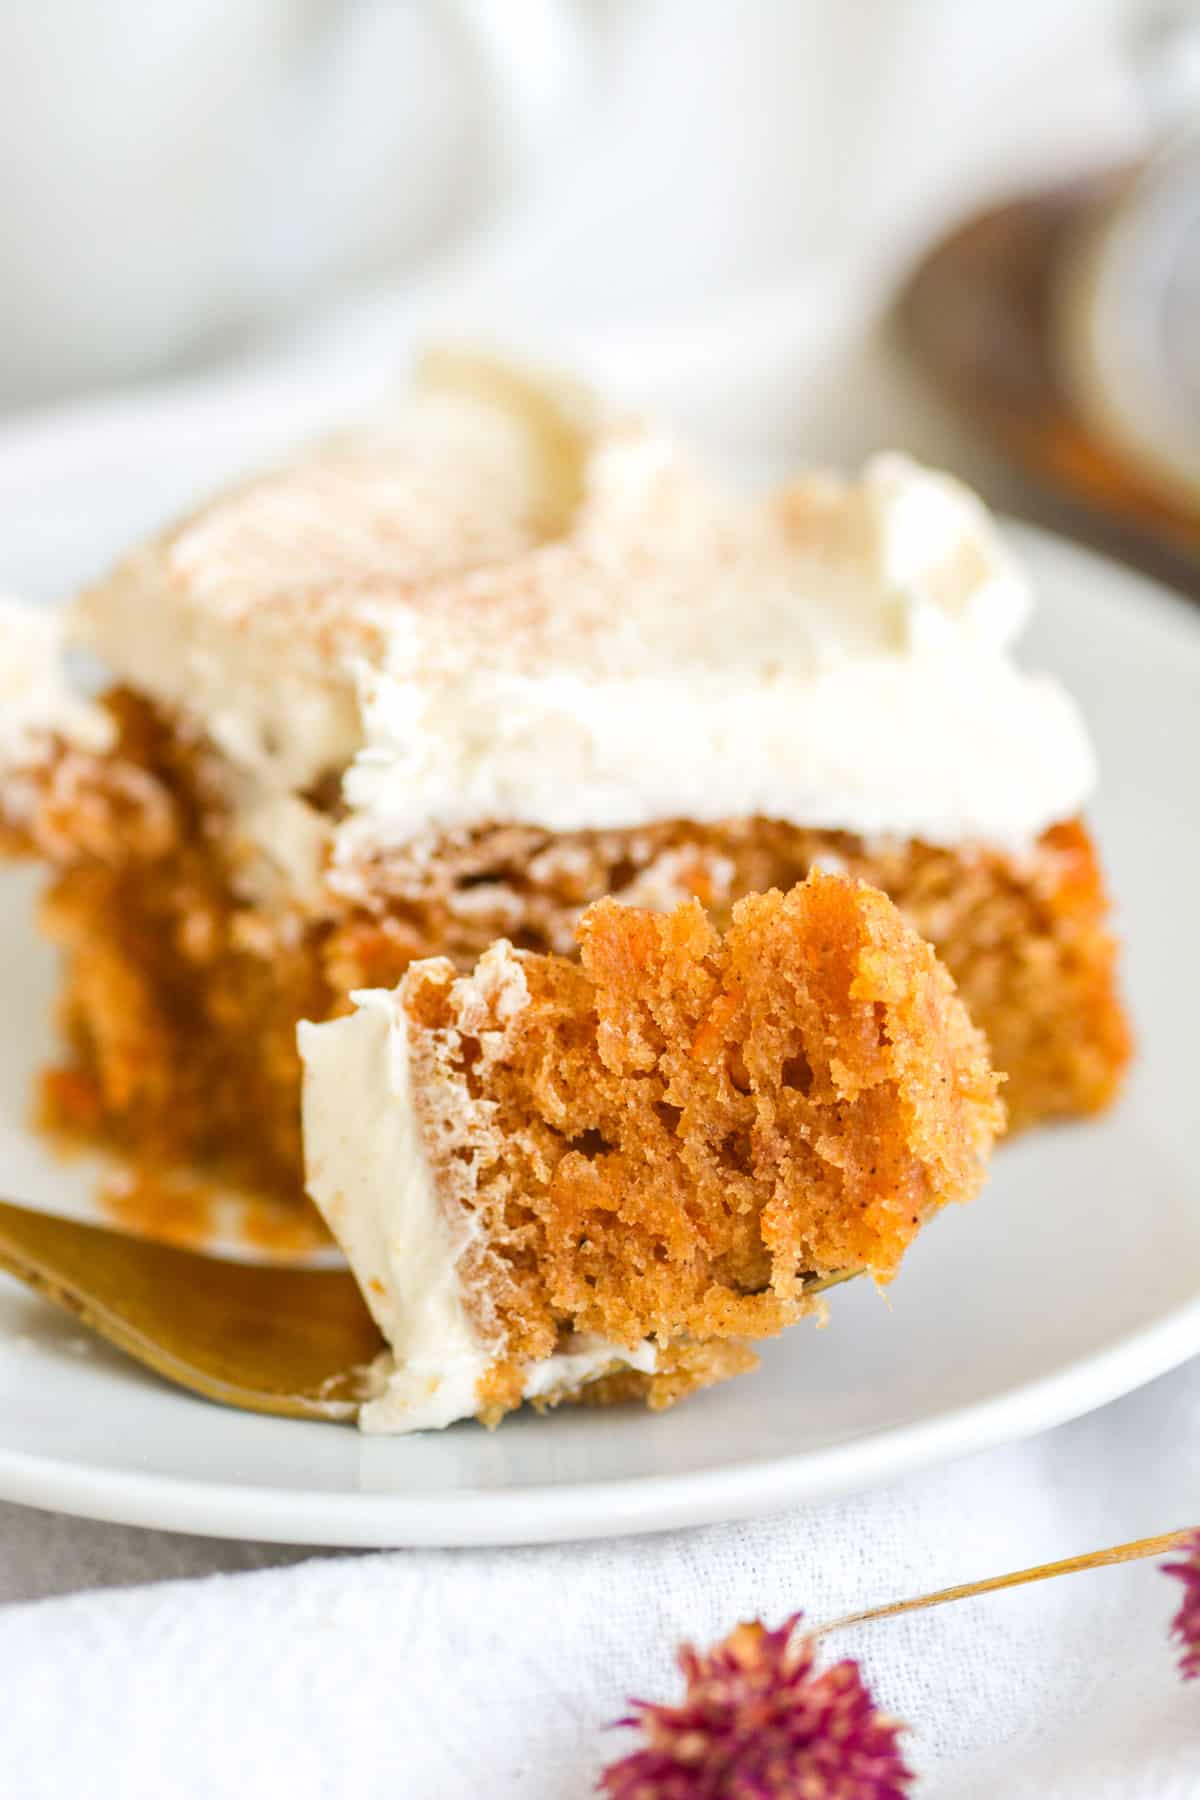 A fork with a bite of Vegan Maple Sweet Potato Cake on it with the remaining cake in the background.